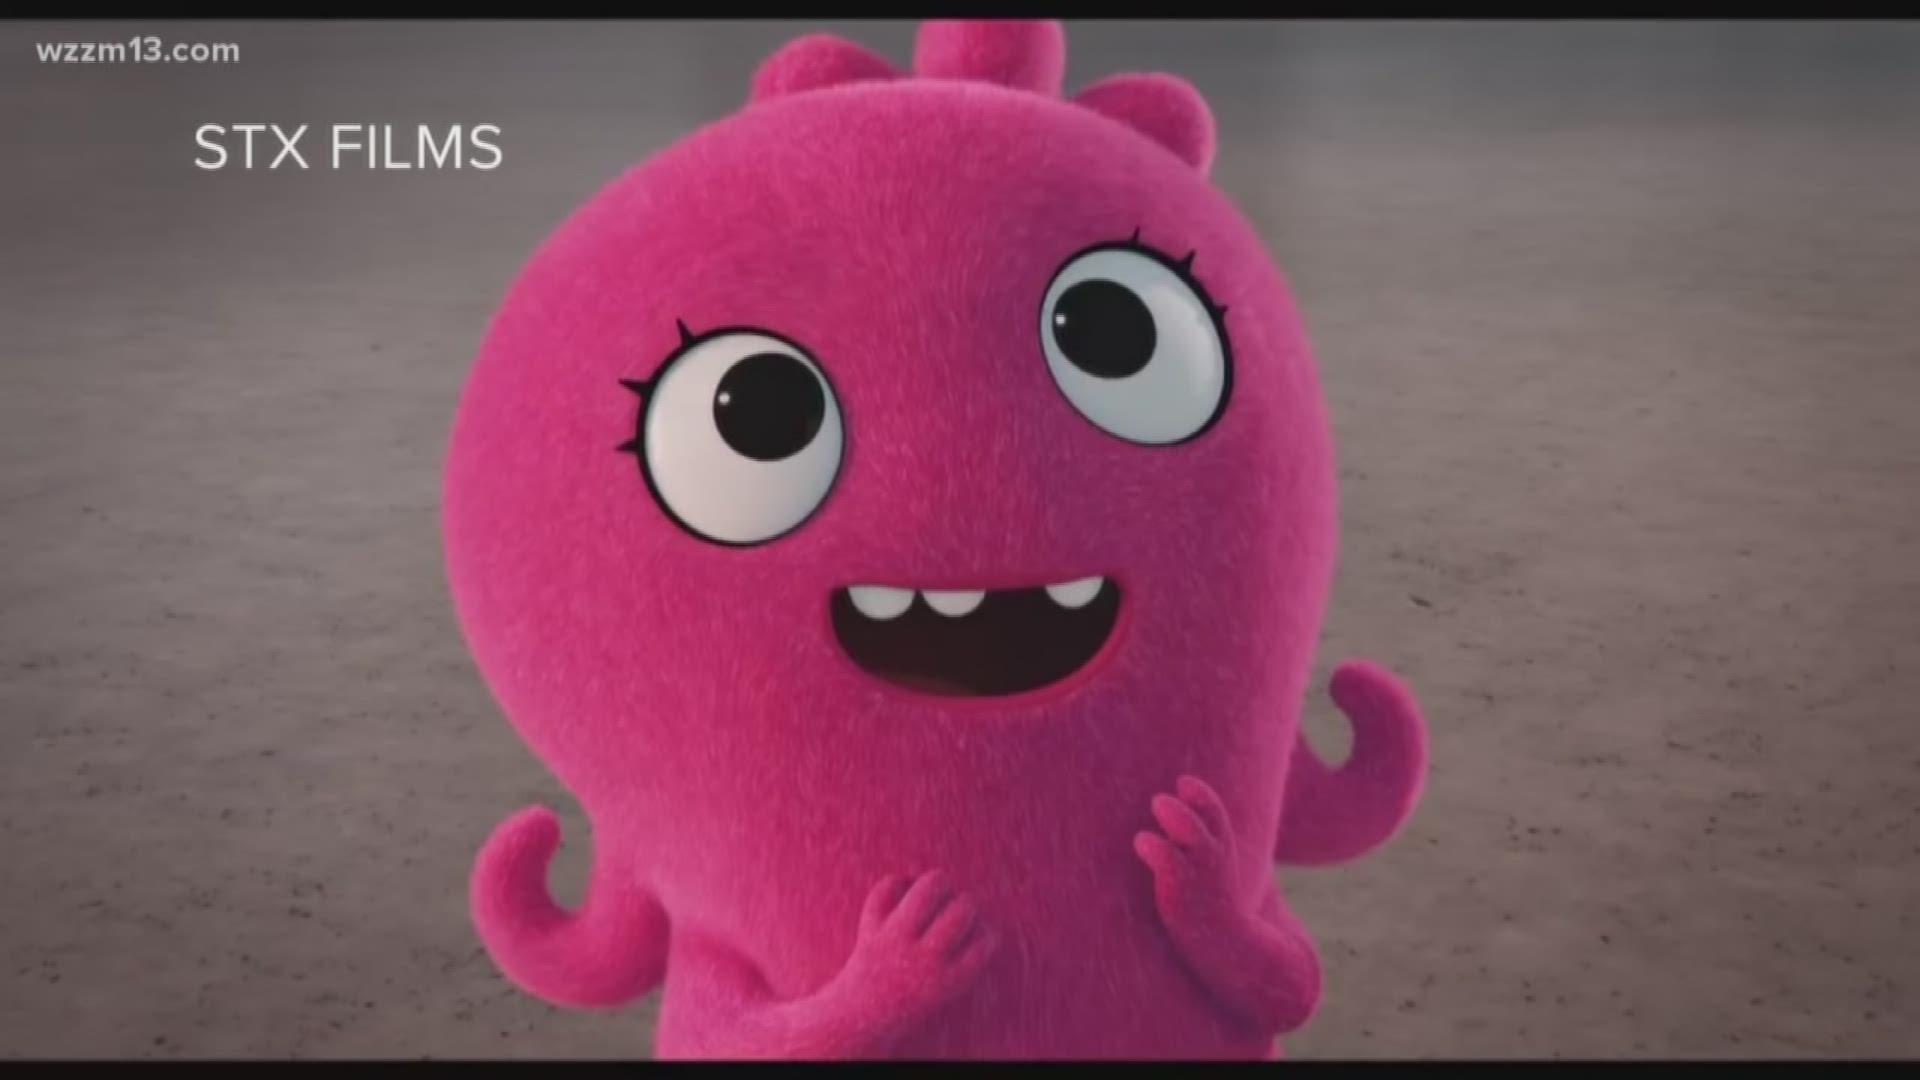 If you've got little ones begging to see "UglyDolls" in theaters, we've got the review from our Box Office Mom, Jackie Solberg.